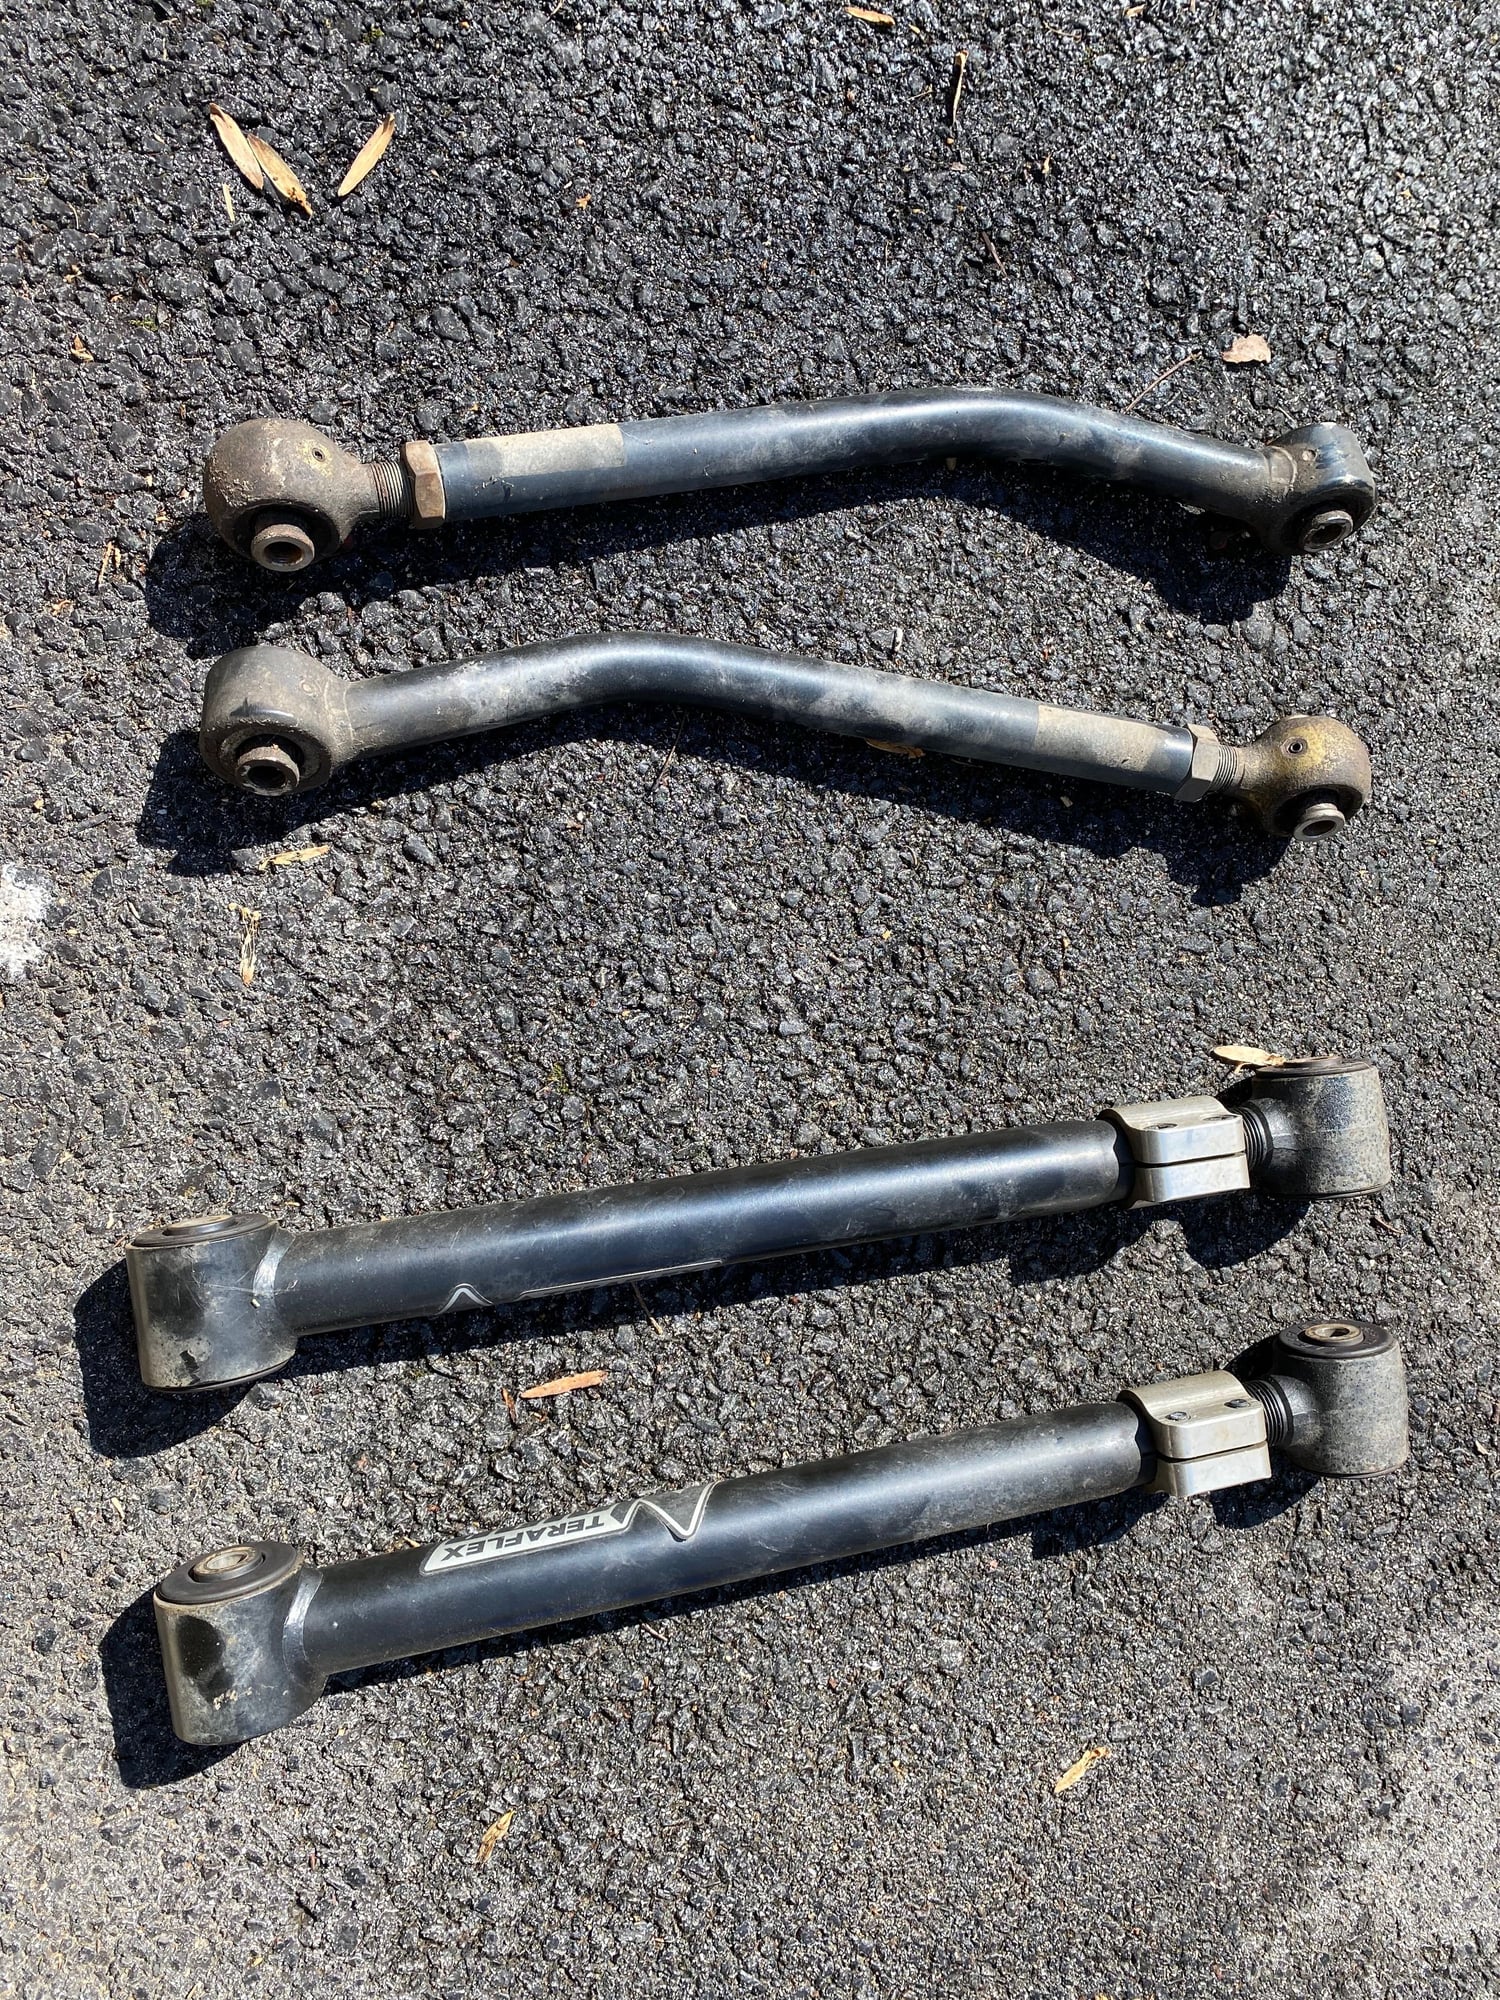 Steering/Suspension - JK rear adjustable control arms (Teraflex Alpine lowers, JKS uppers) - Used - 2007 to 2017 Jeep Wrangler - Potomac, MD 20854, United States